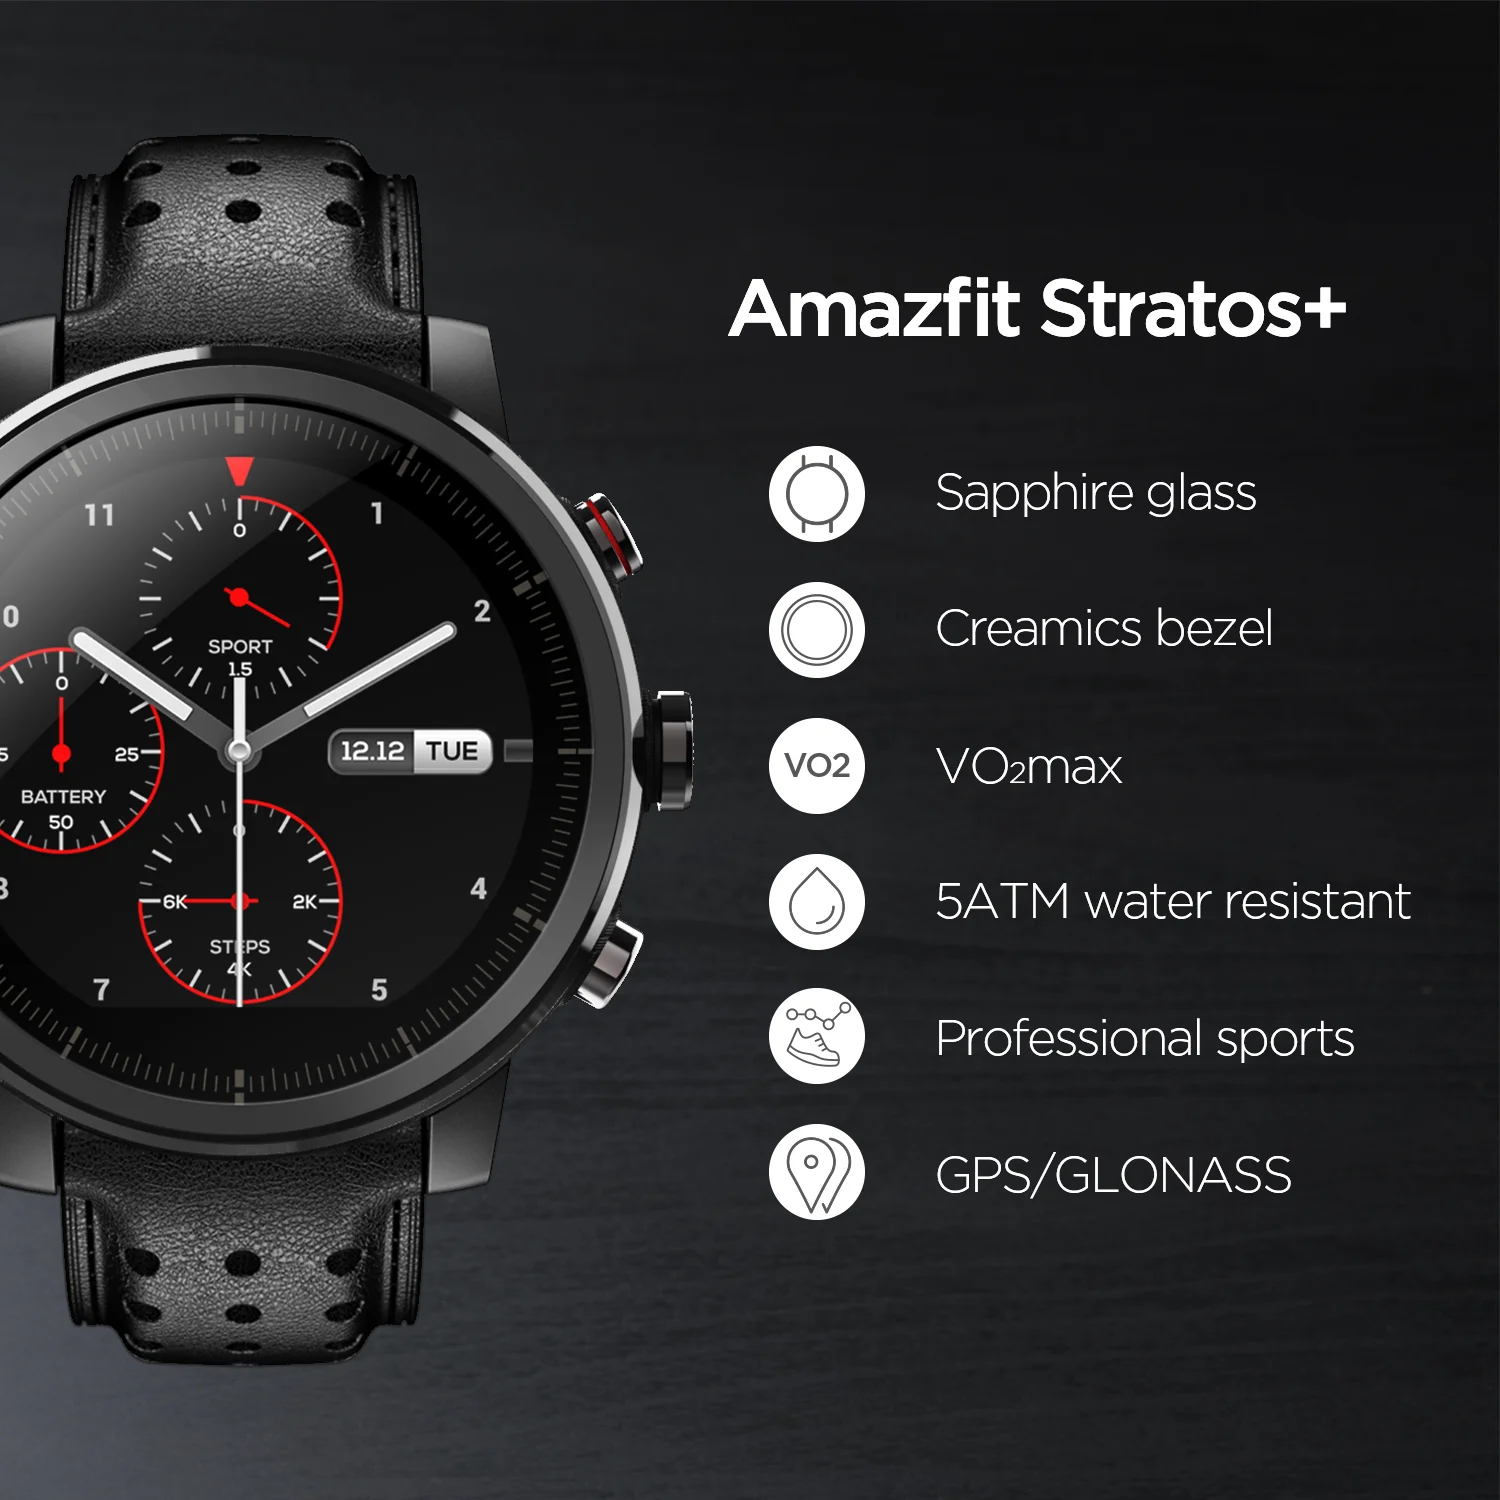 

2019 New Amazfit Stratos+ Professional Smart Watch Genuine Leather Strap Gift Box Sapphire 2S for Android iOS Phone